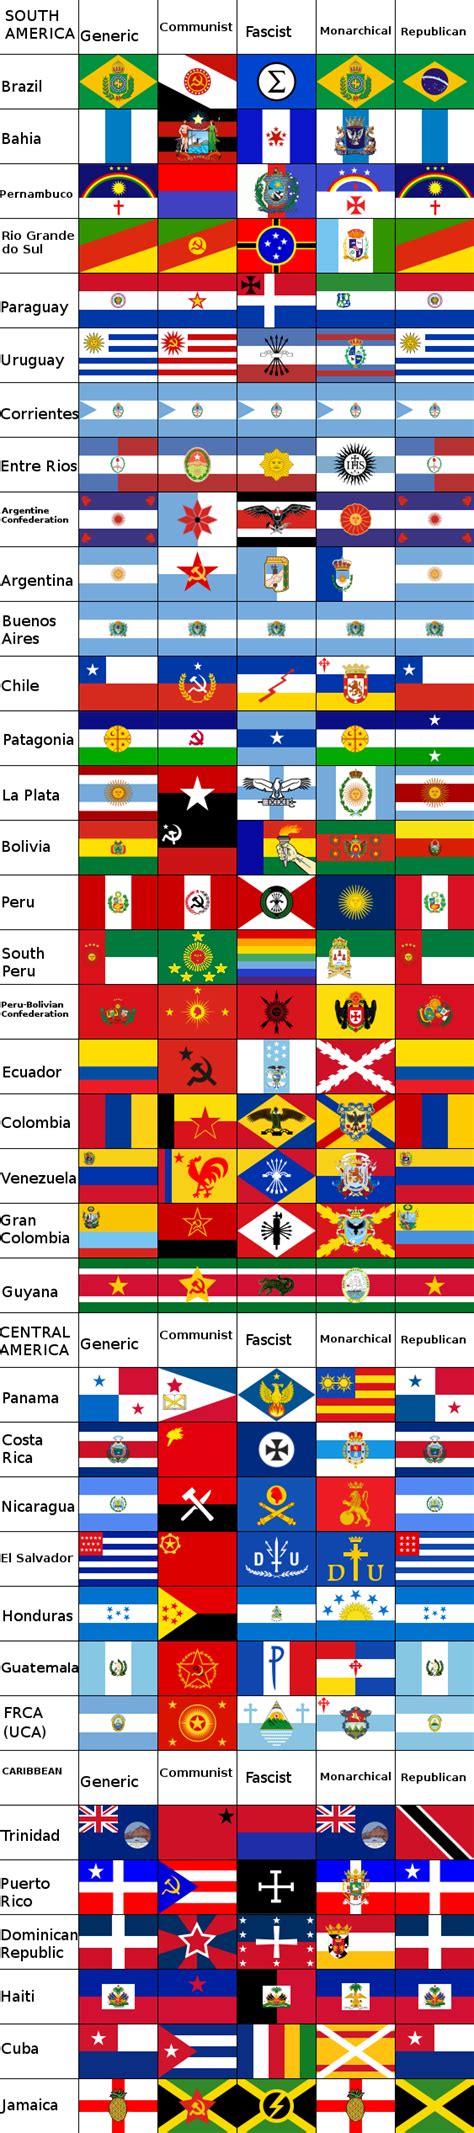 180 Alternate Southcentral American Flags Rvexillology